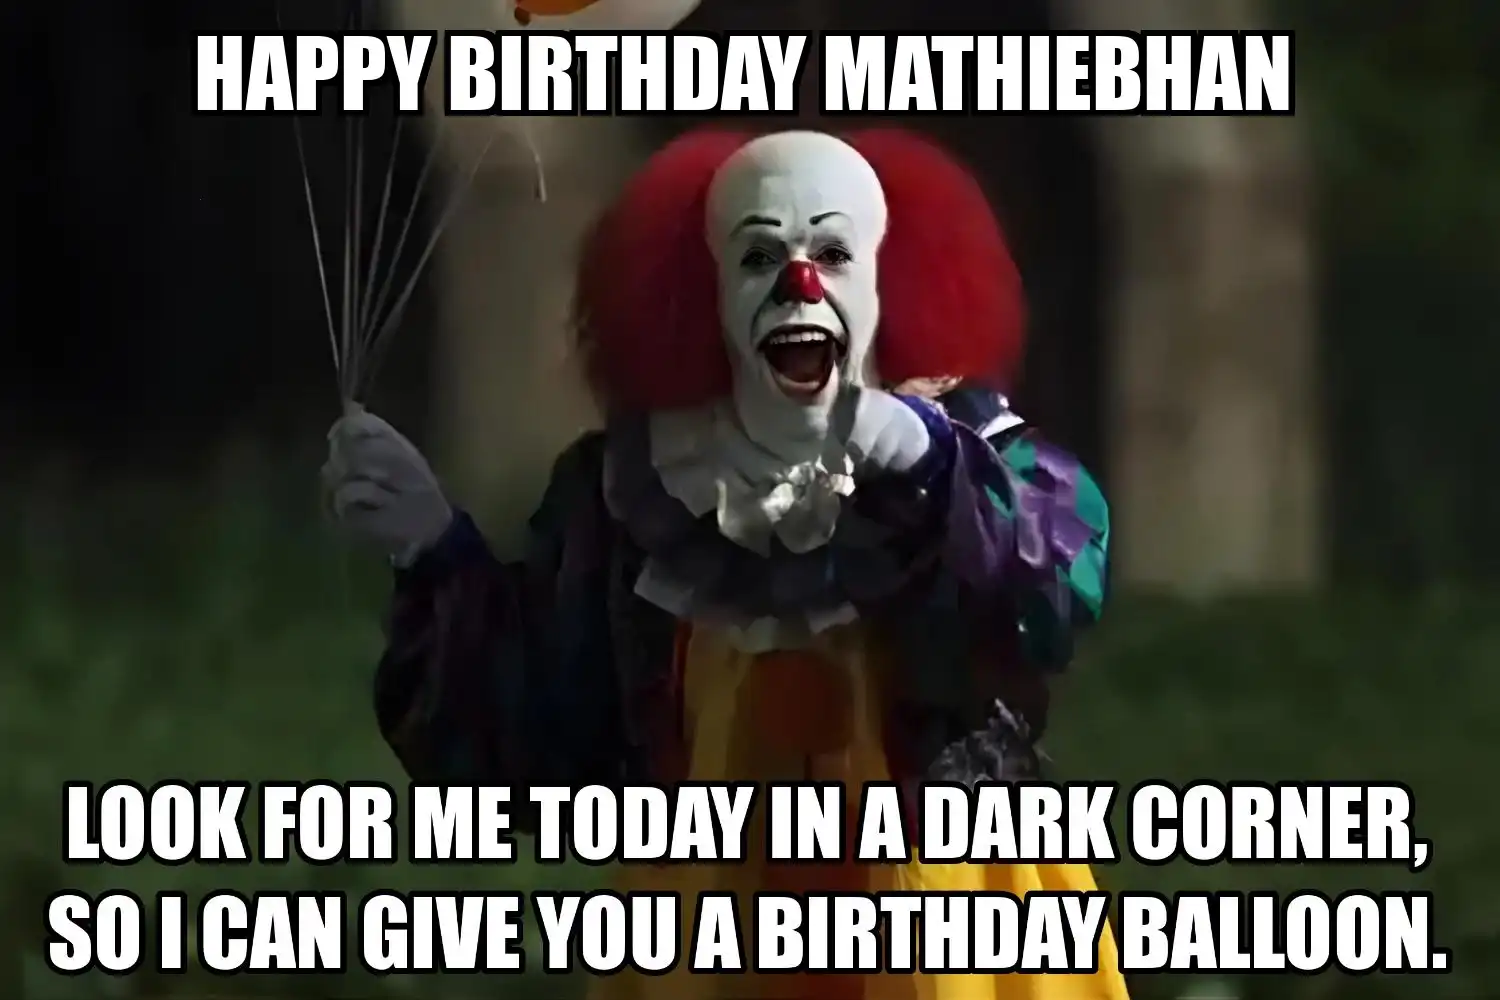 Happy Birthday Mathiebhan I Can Give You A Balloon Meme